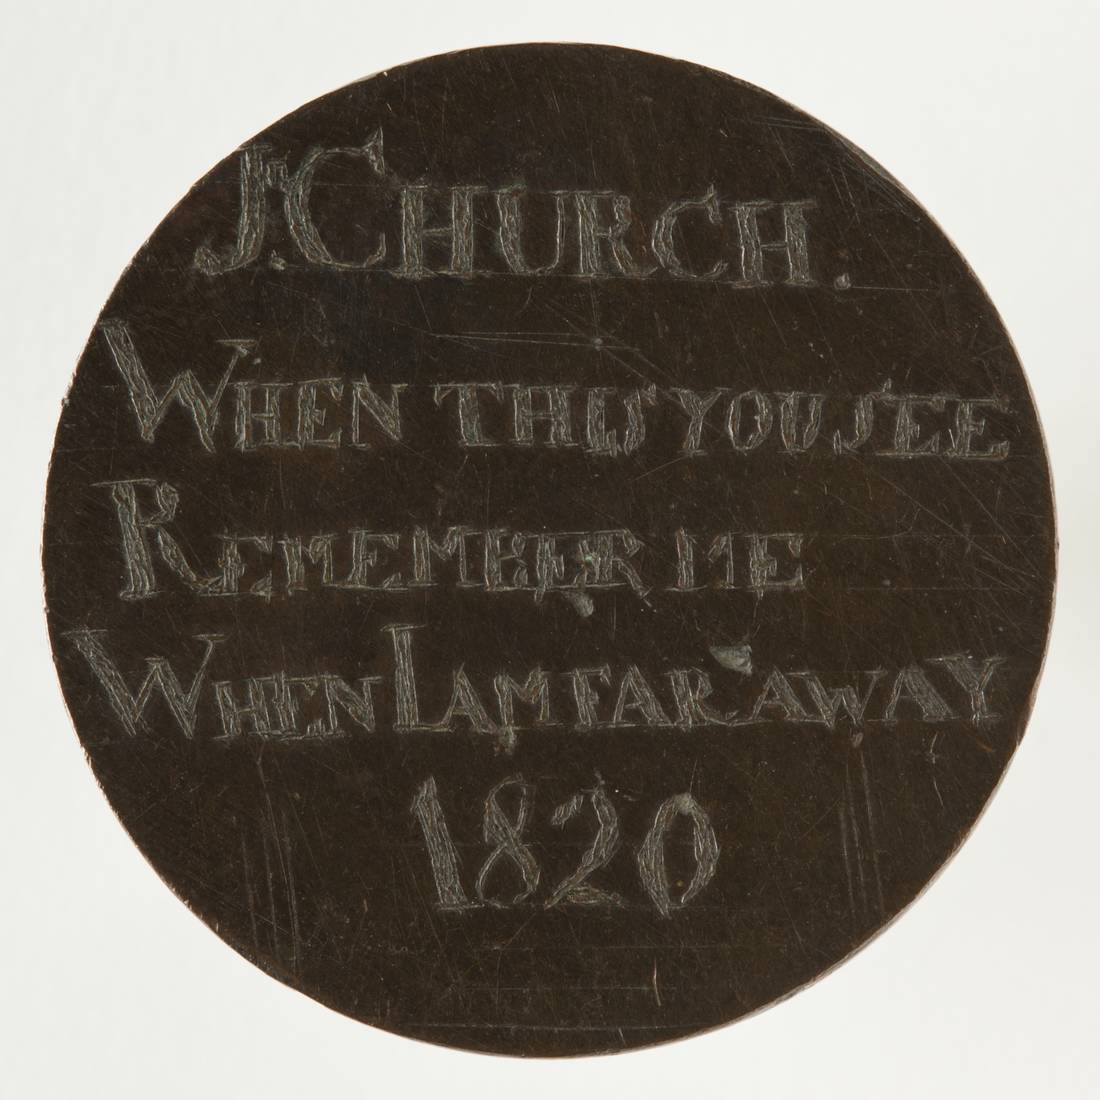 A convict love token, made up of a coin, engraved on both sides.